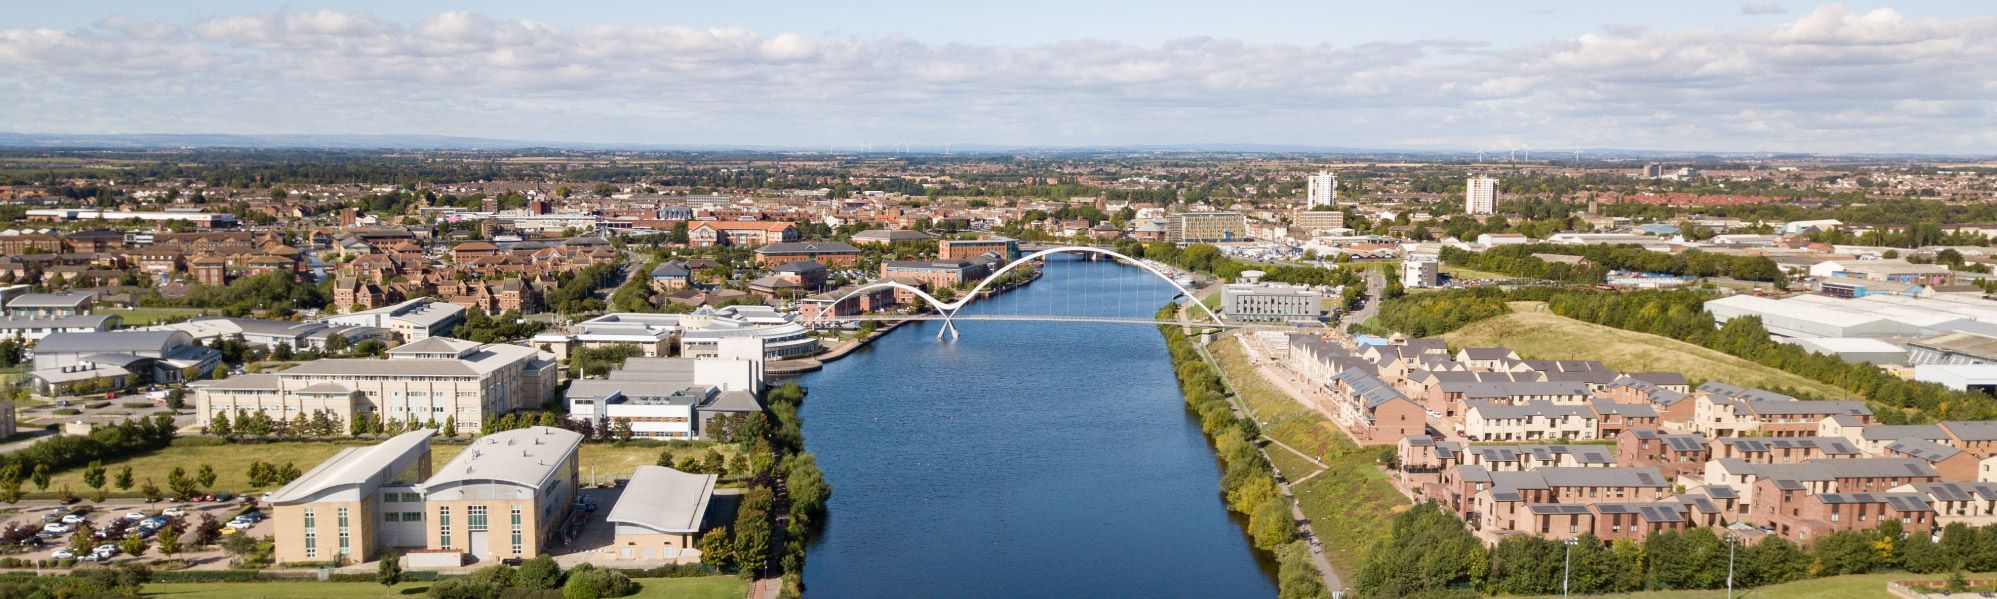 Local Businesses Welcome Regional Teesside Development Plans